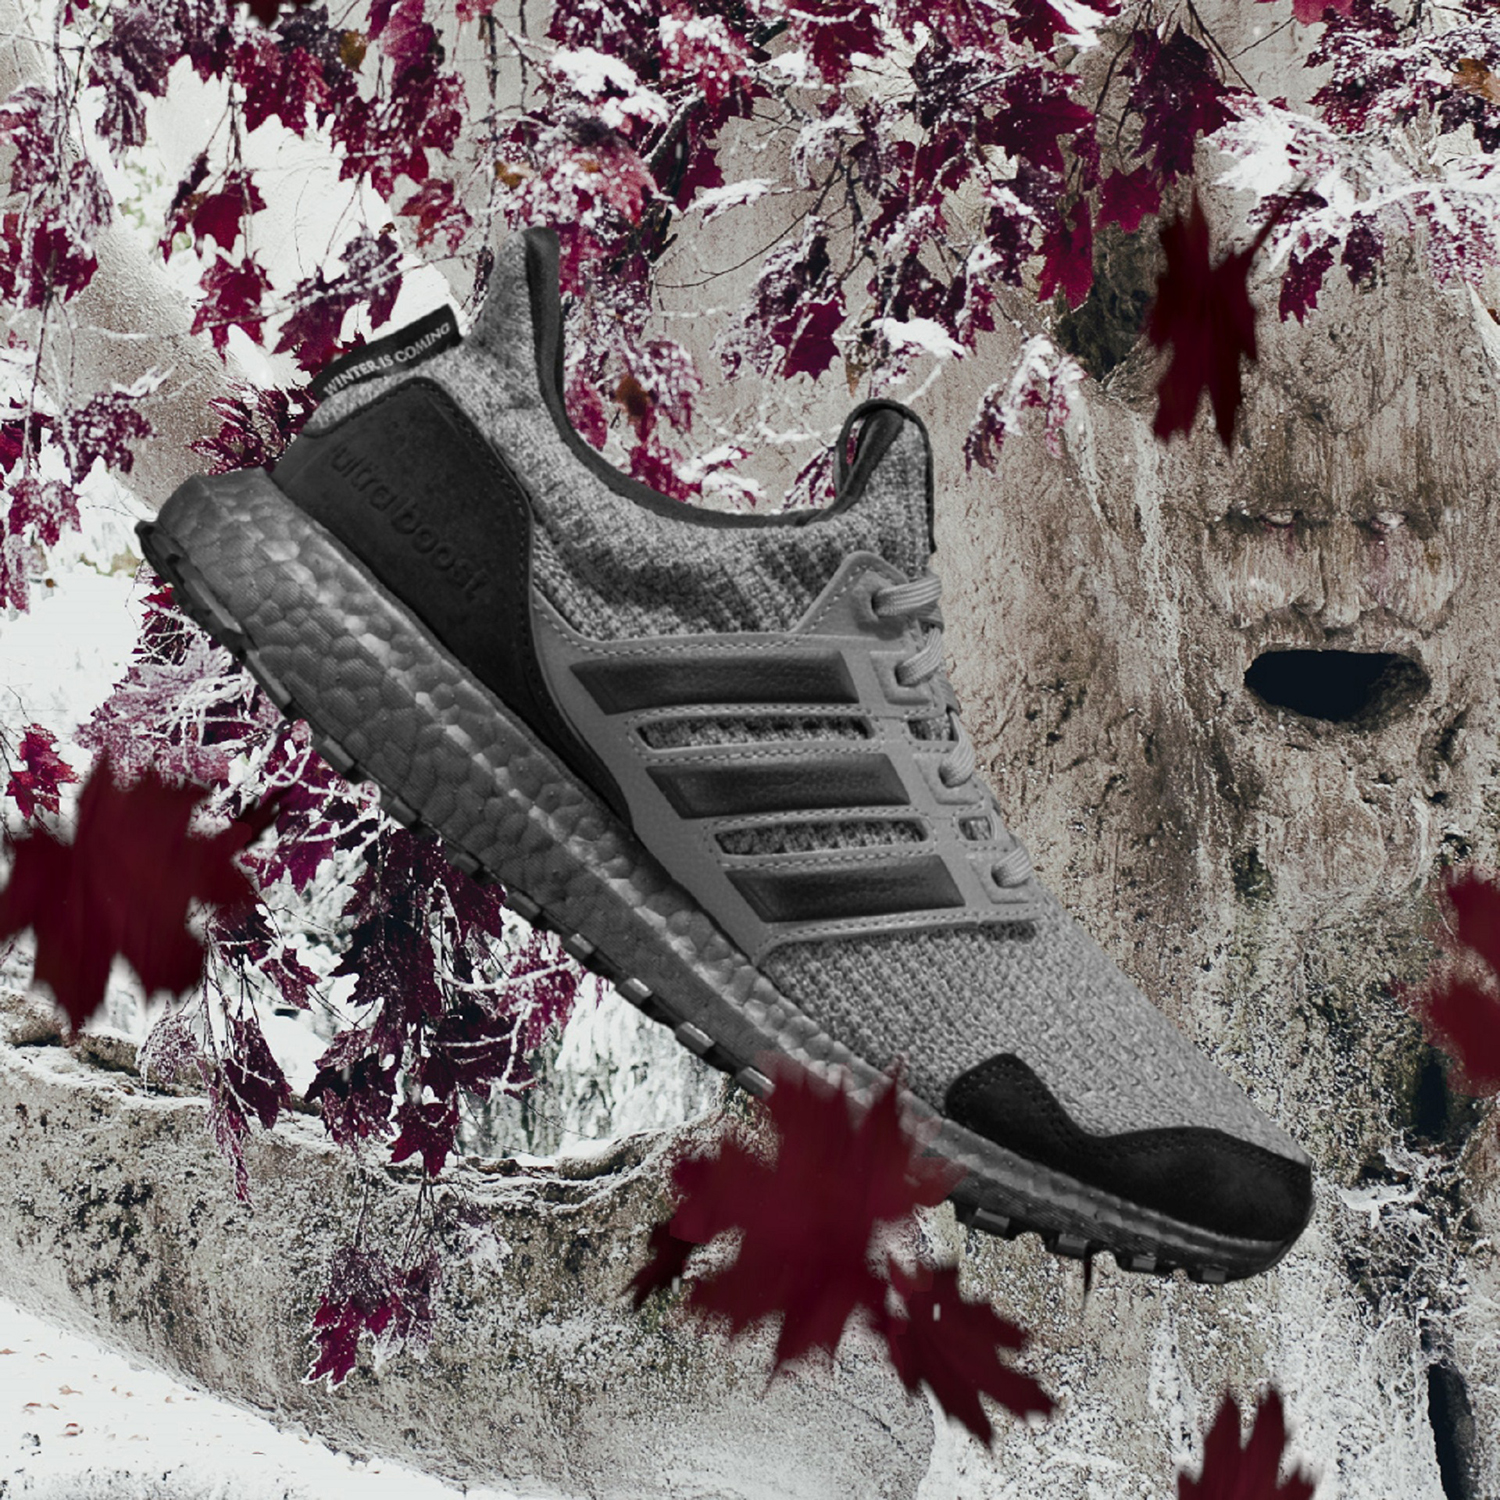 Adidas Drops those Magical Game of Thrones Sneakers - The Manual